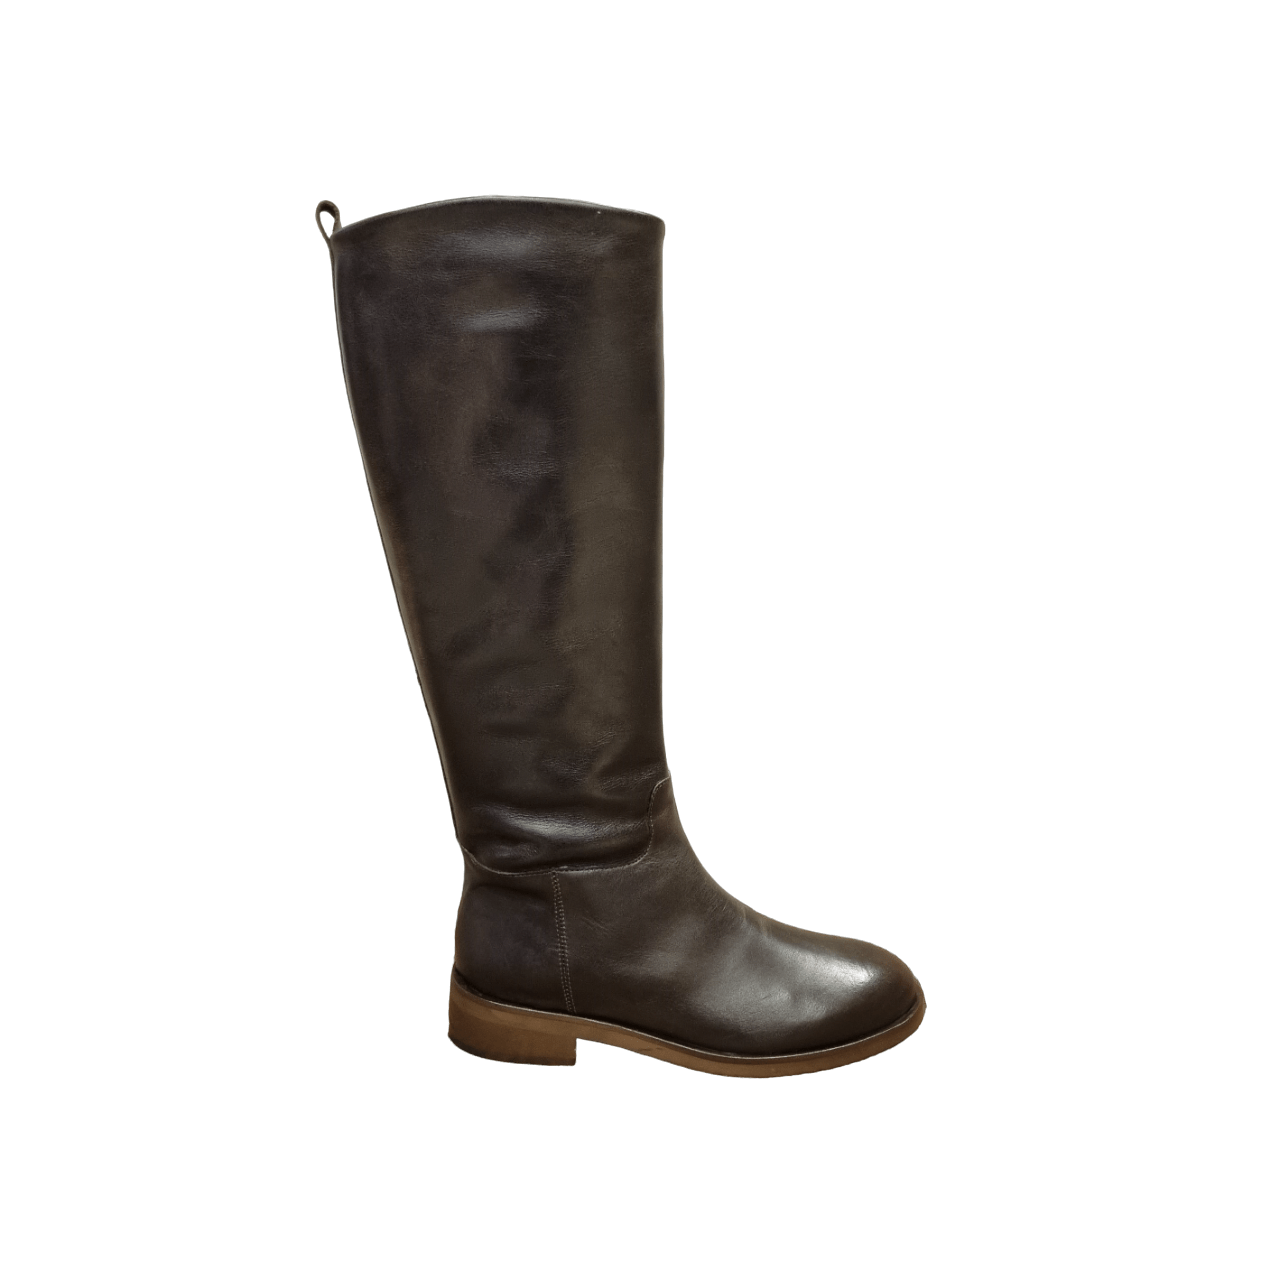 PAOLA FERRI BROWN LEATHER KNEE BOOTS